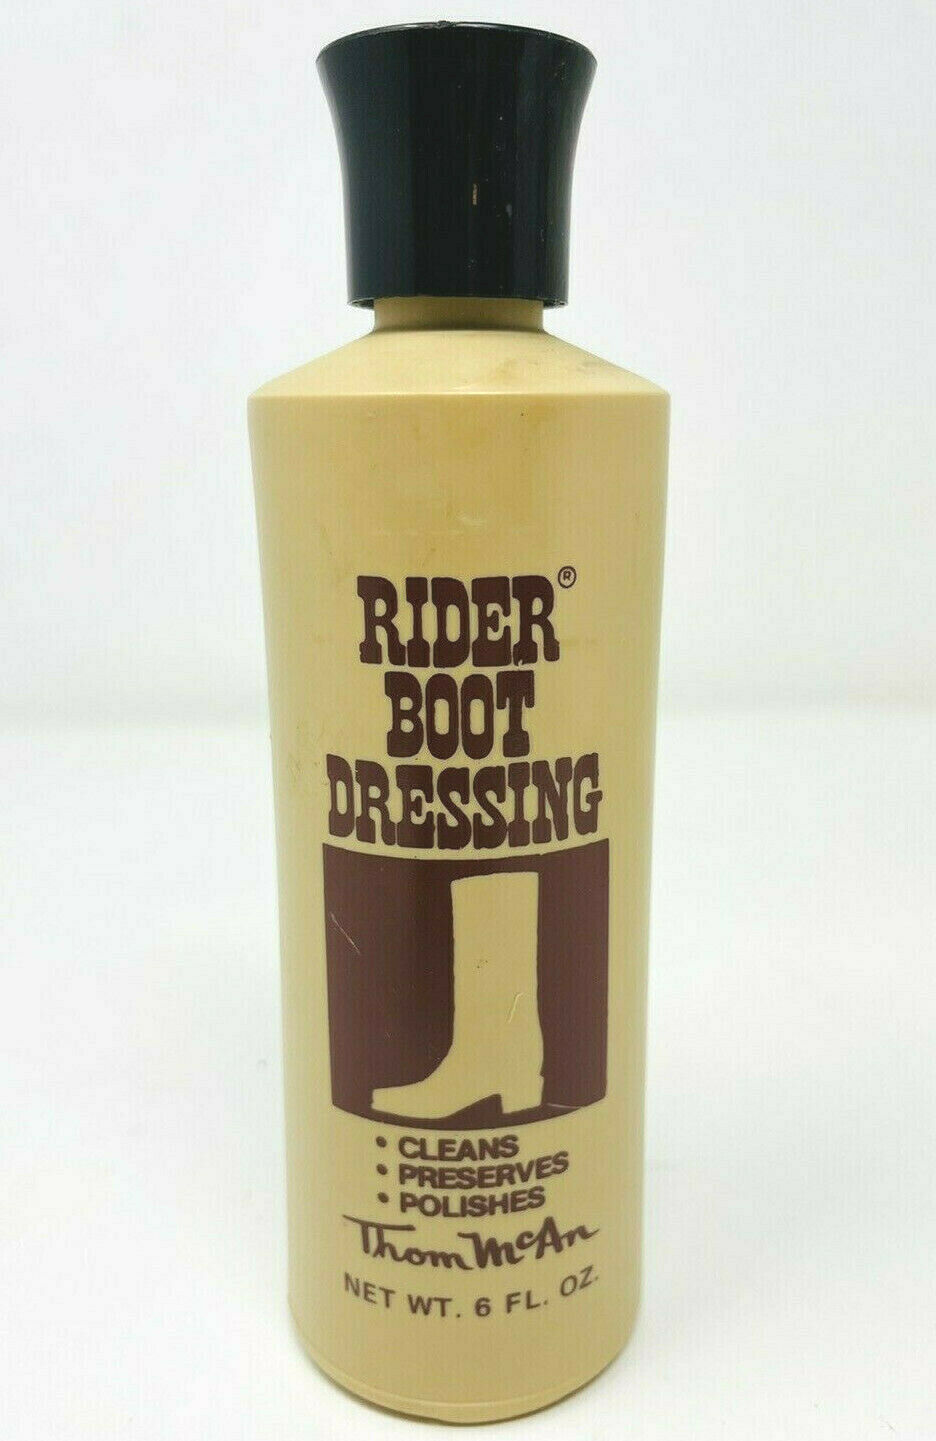 Thom Mcan Rider Boot Dressing New Old Stock Cleaner Leather Shoe Polish Vintage